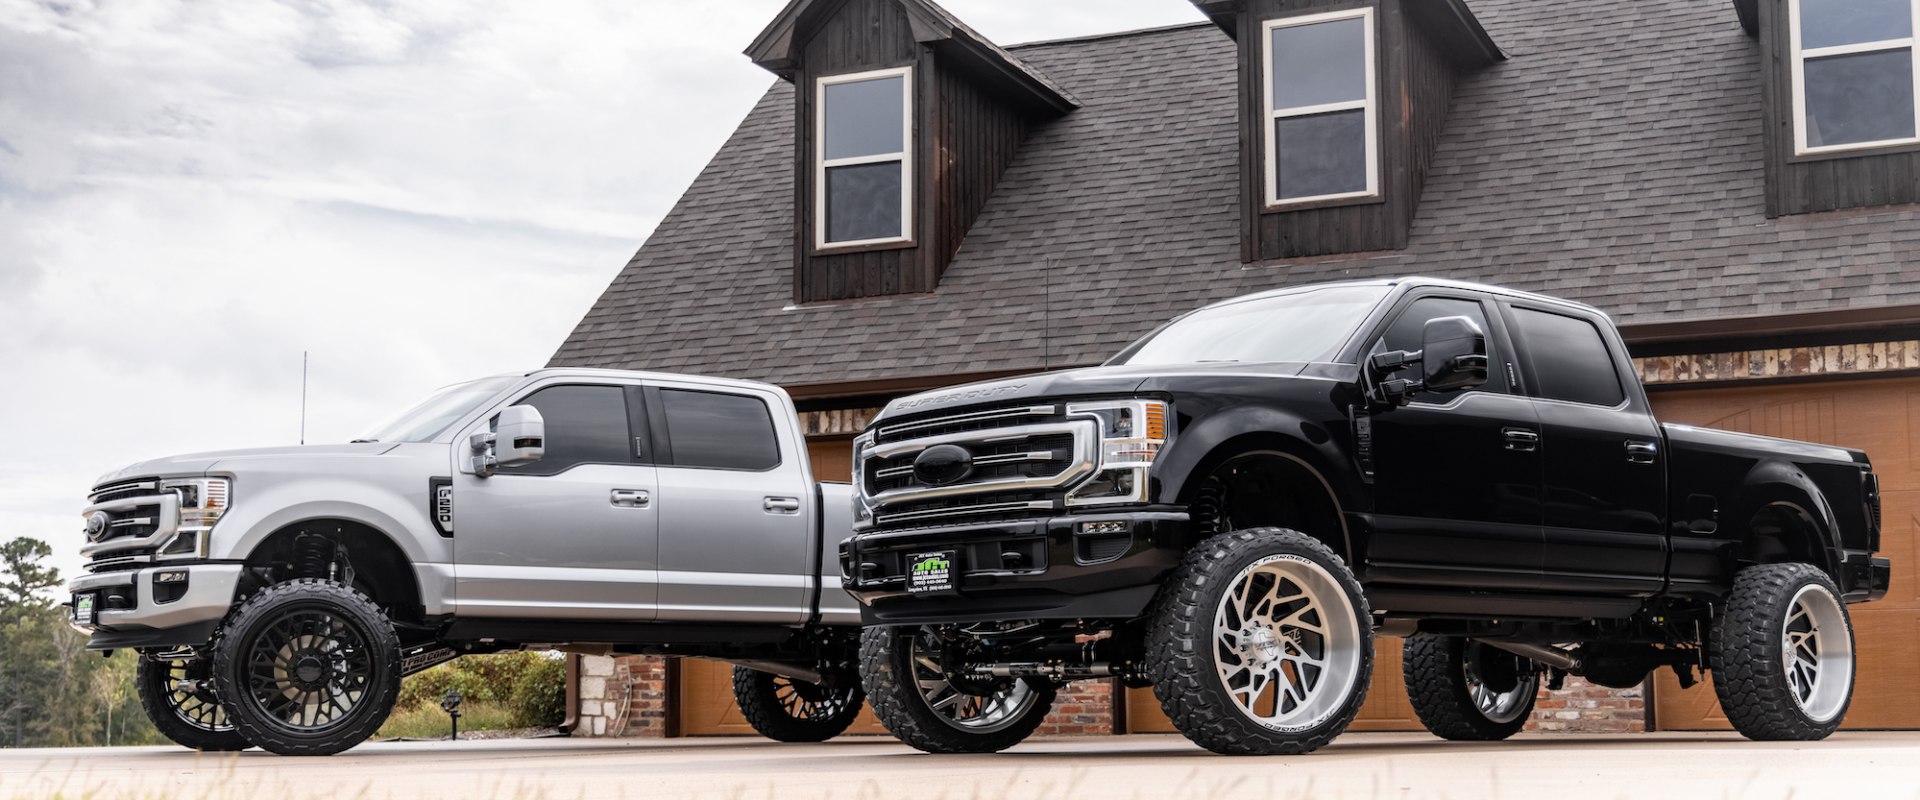 Forged Trucks: All You Need to Know